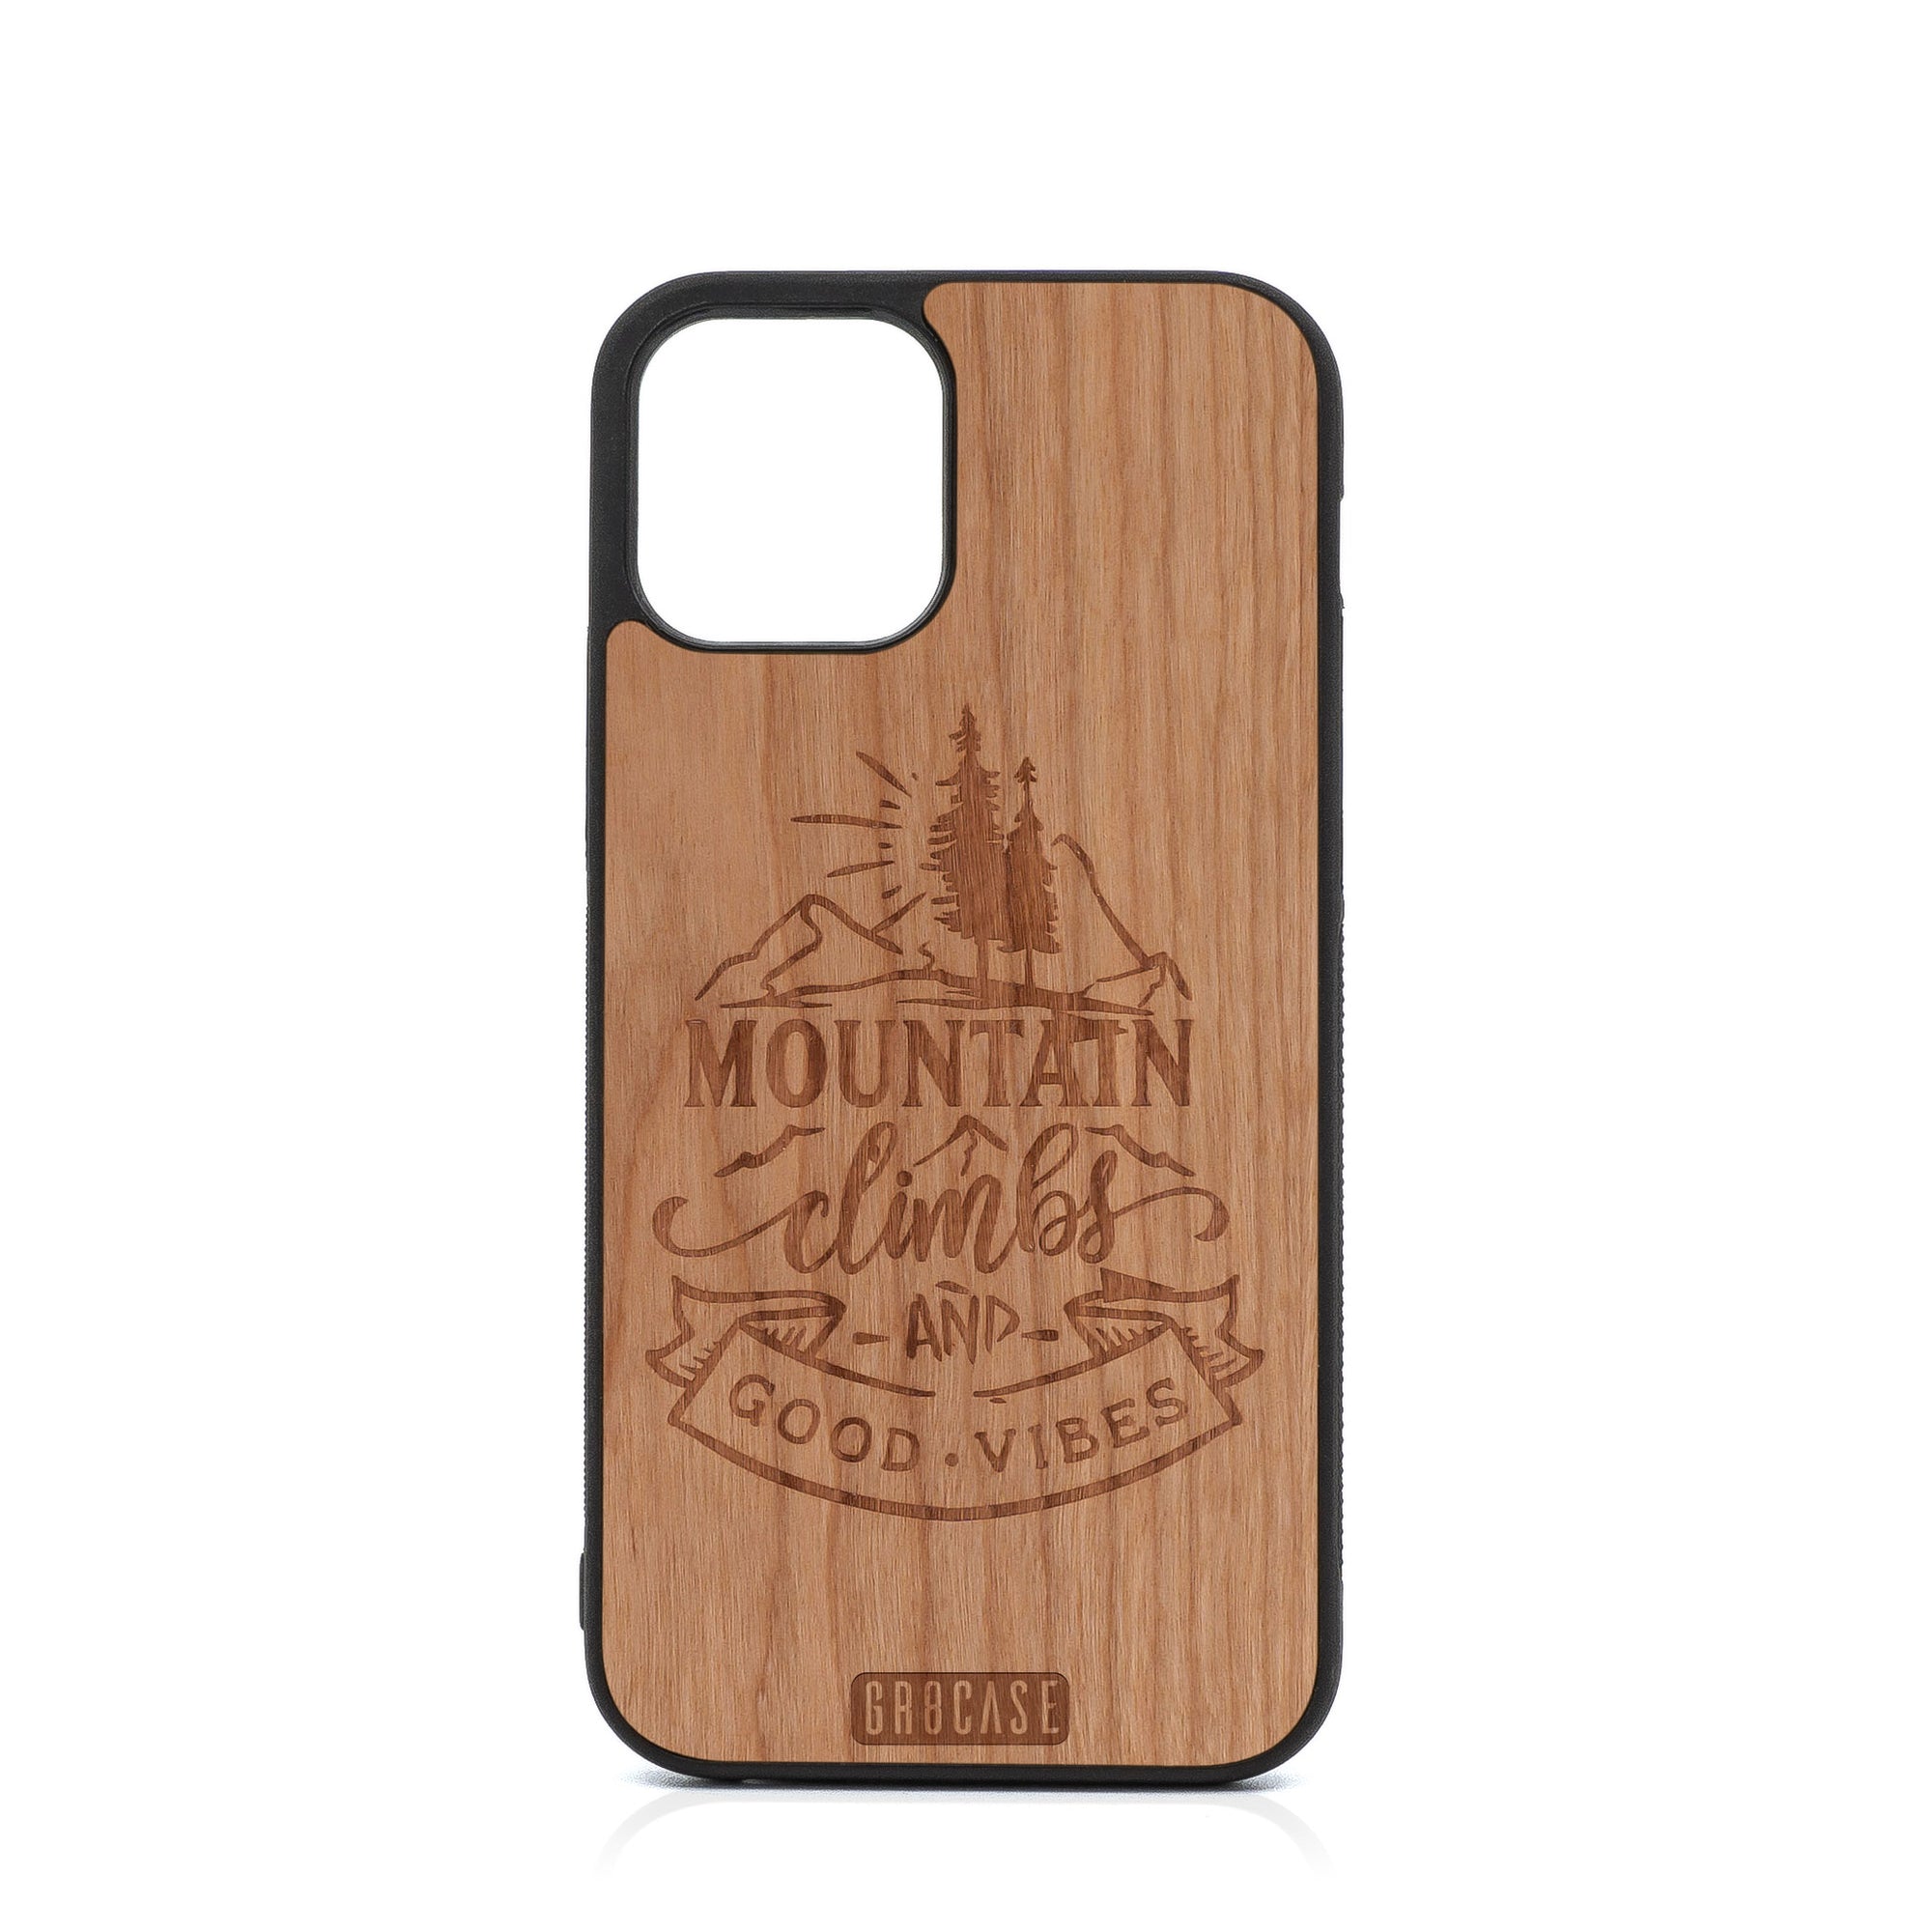 Mountain Climbs And Good Vibes Design Wood Case For iPhone 12